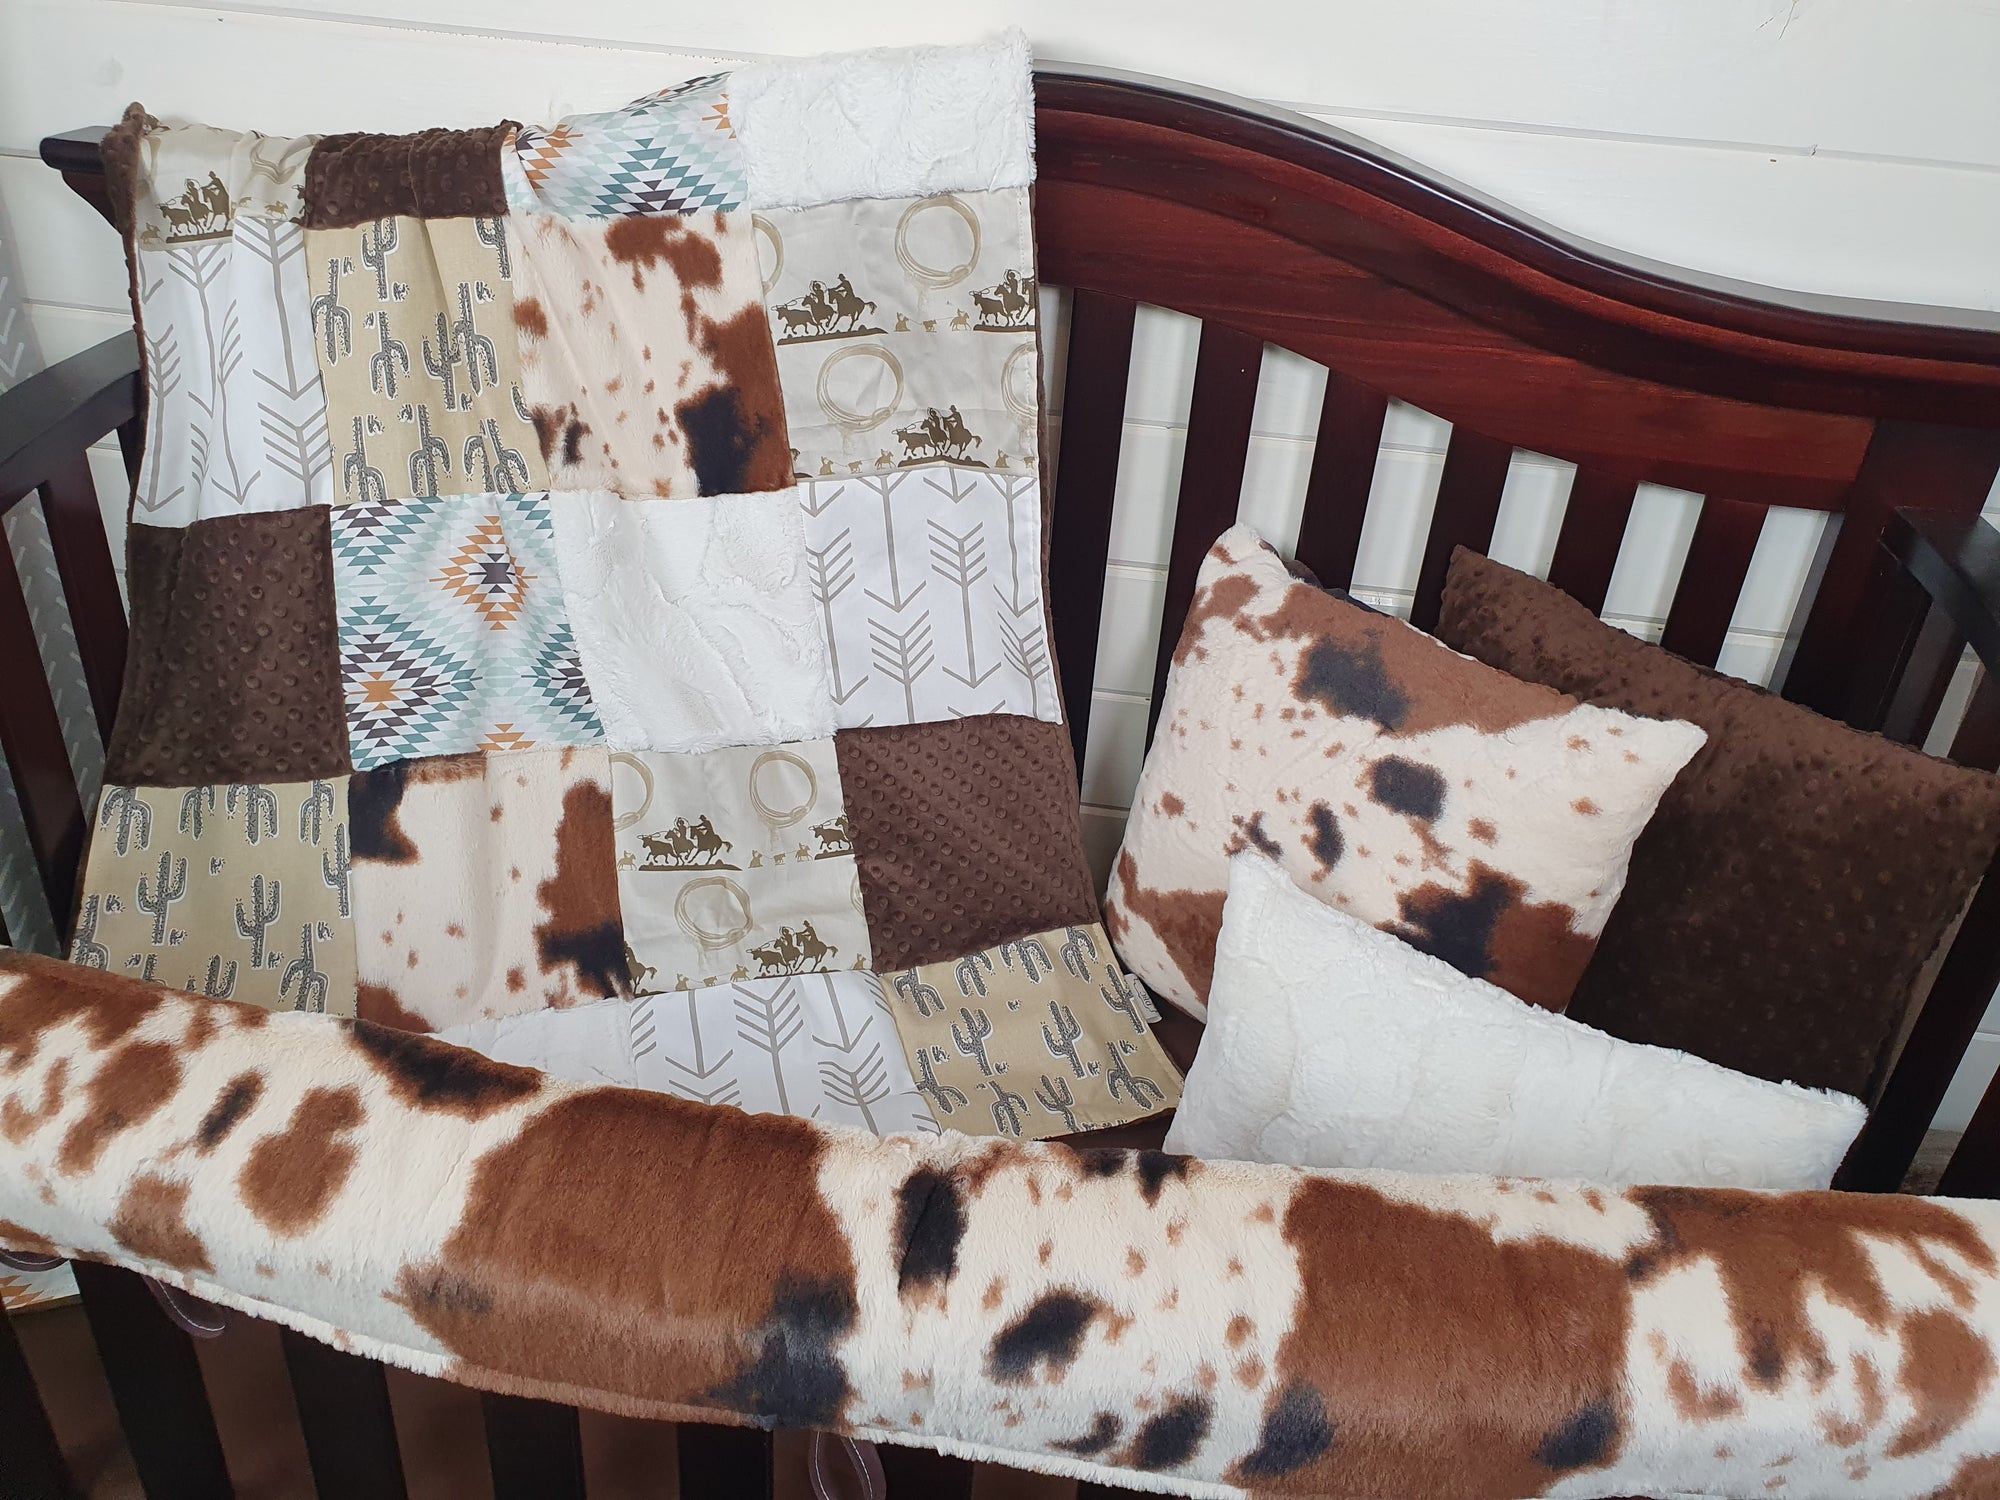 New Release Boy Crib Bedding- Roping Cowboy and Cow Minky Western Baby Bedding & Nursery Collection - DBC Baby Bedding Co 